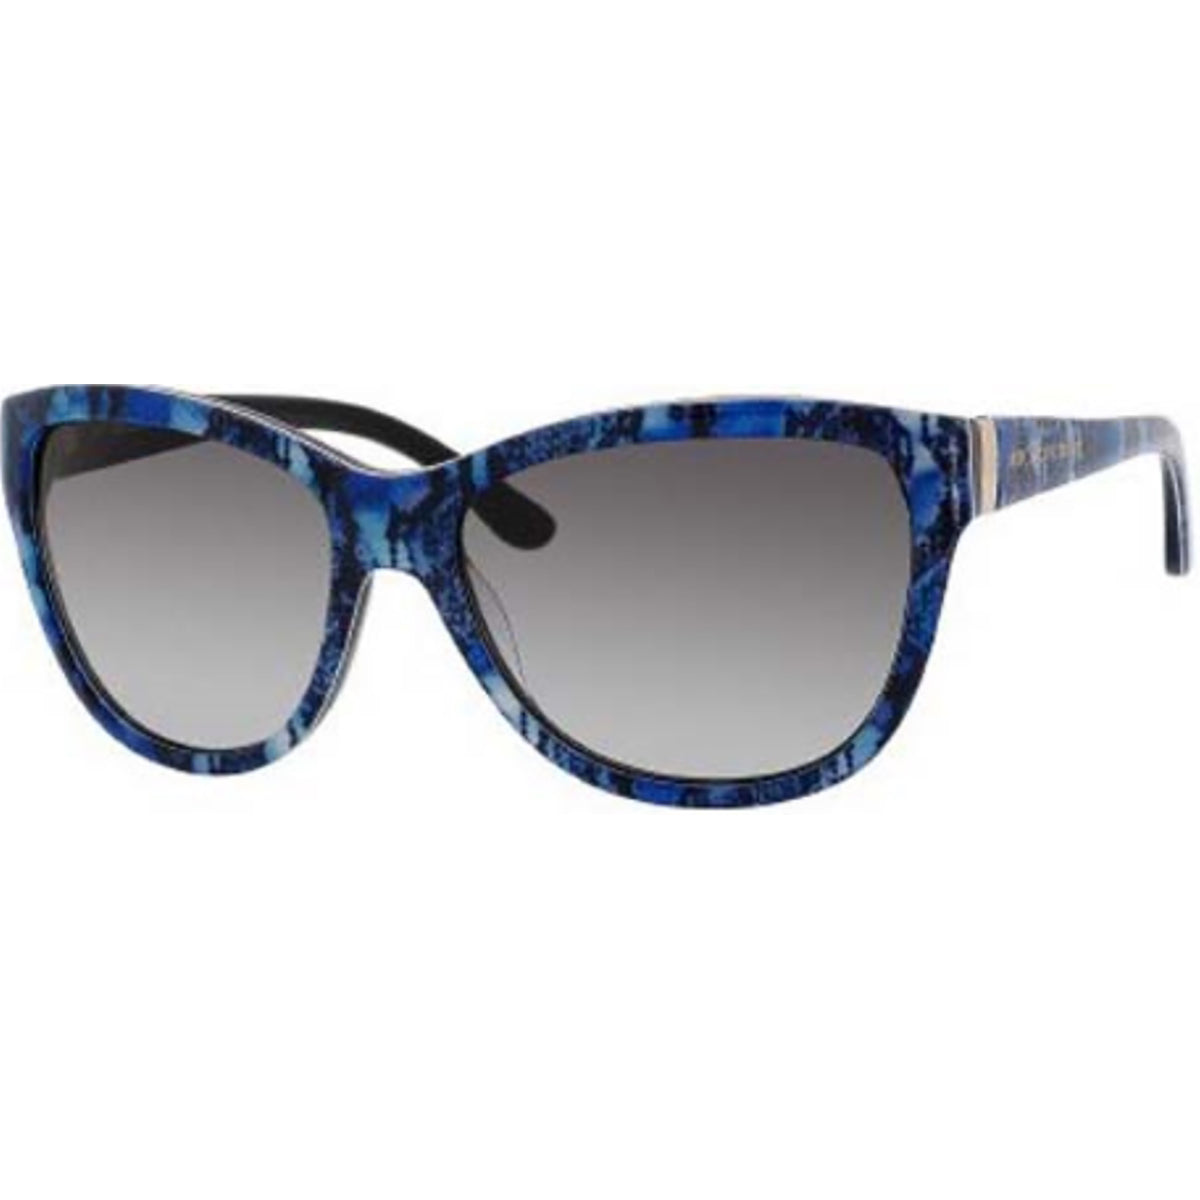 Juicy Couture 526/S Women's Lifestyle Sunglasses-JUC